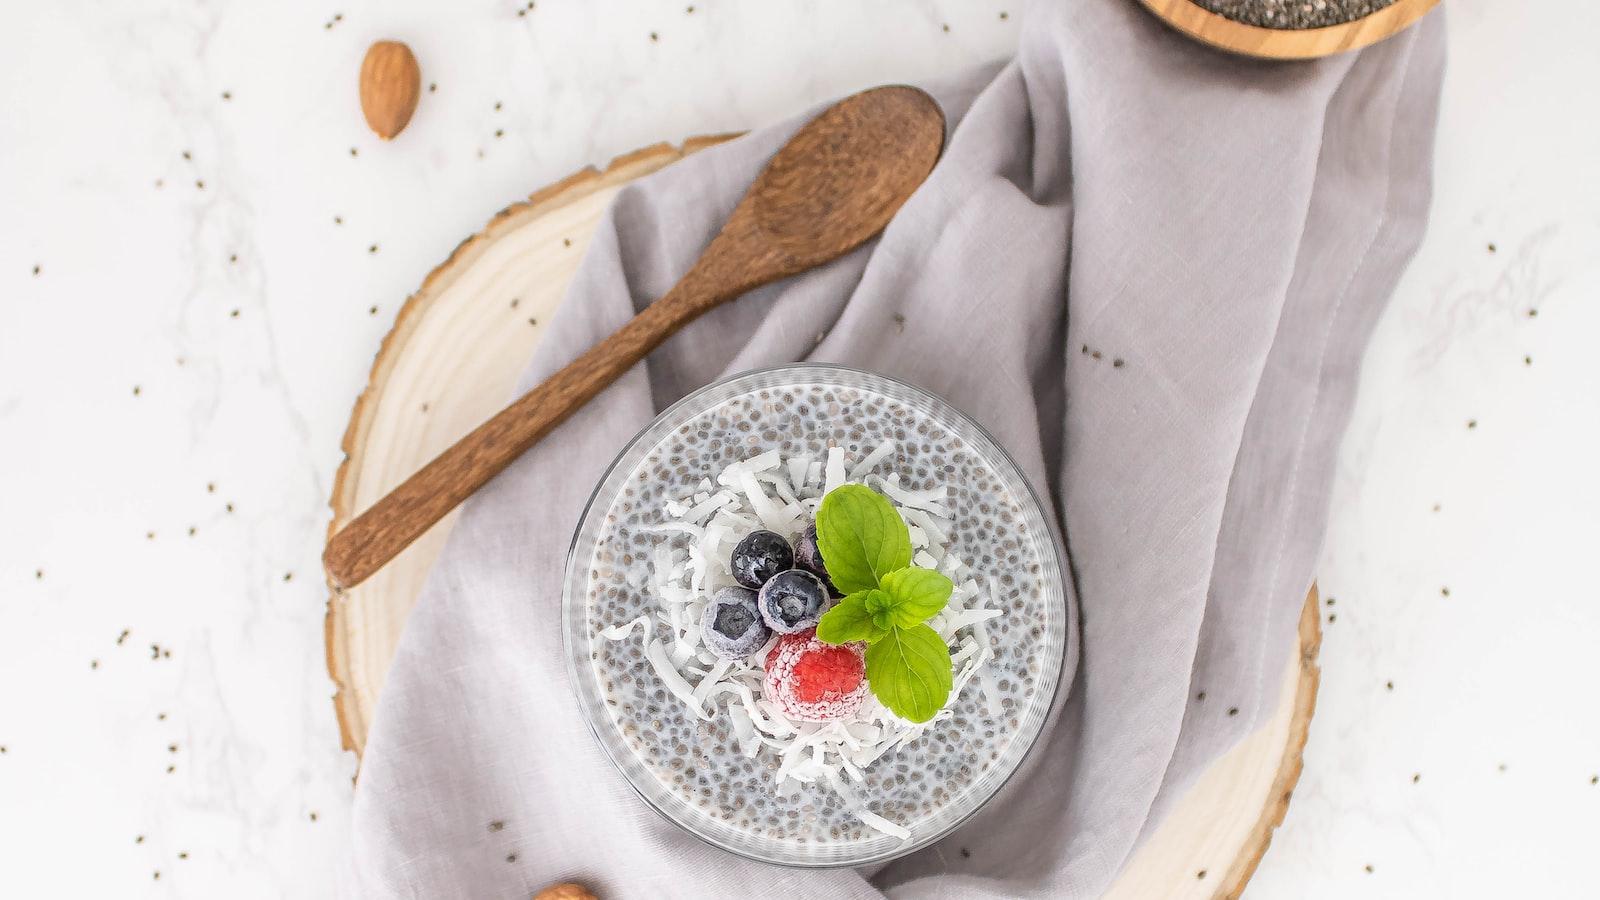 How To Serve Chia Seeds To Baby